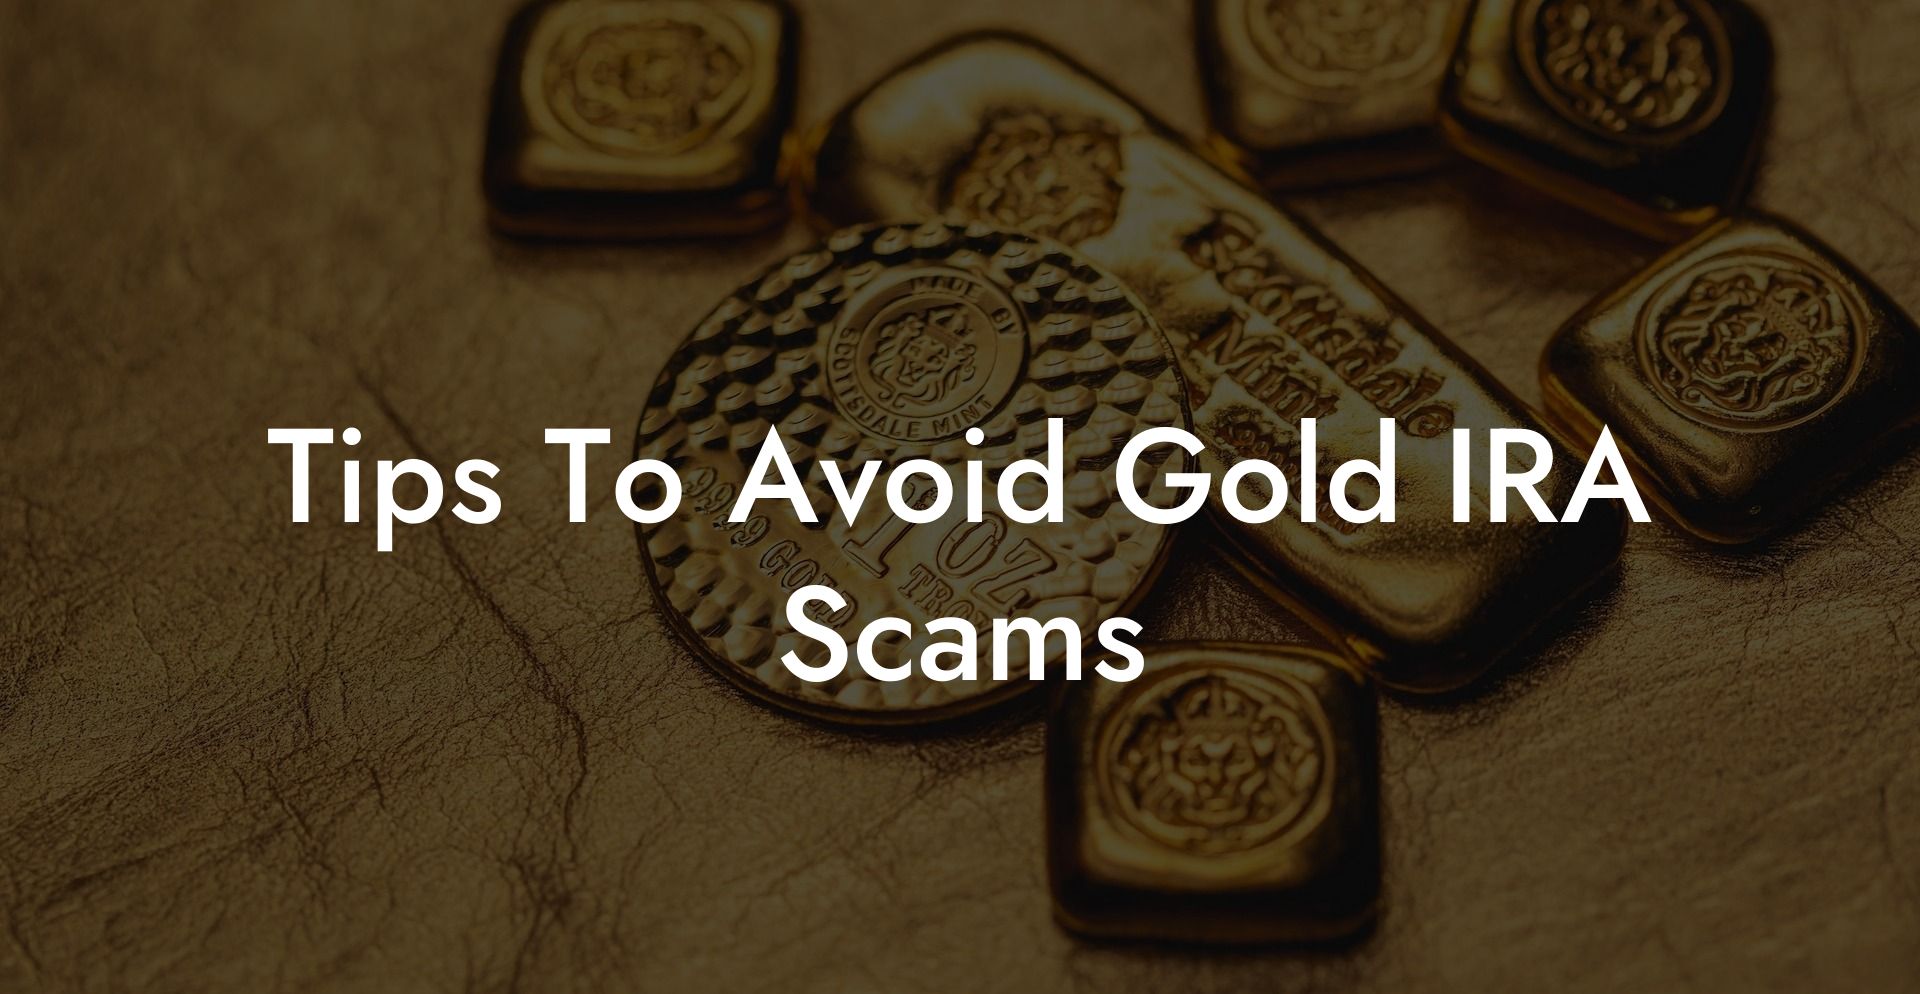 Tips To Avoid Gold IRA Scams